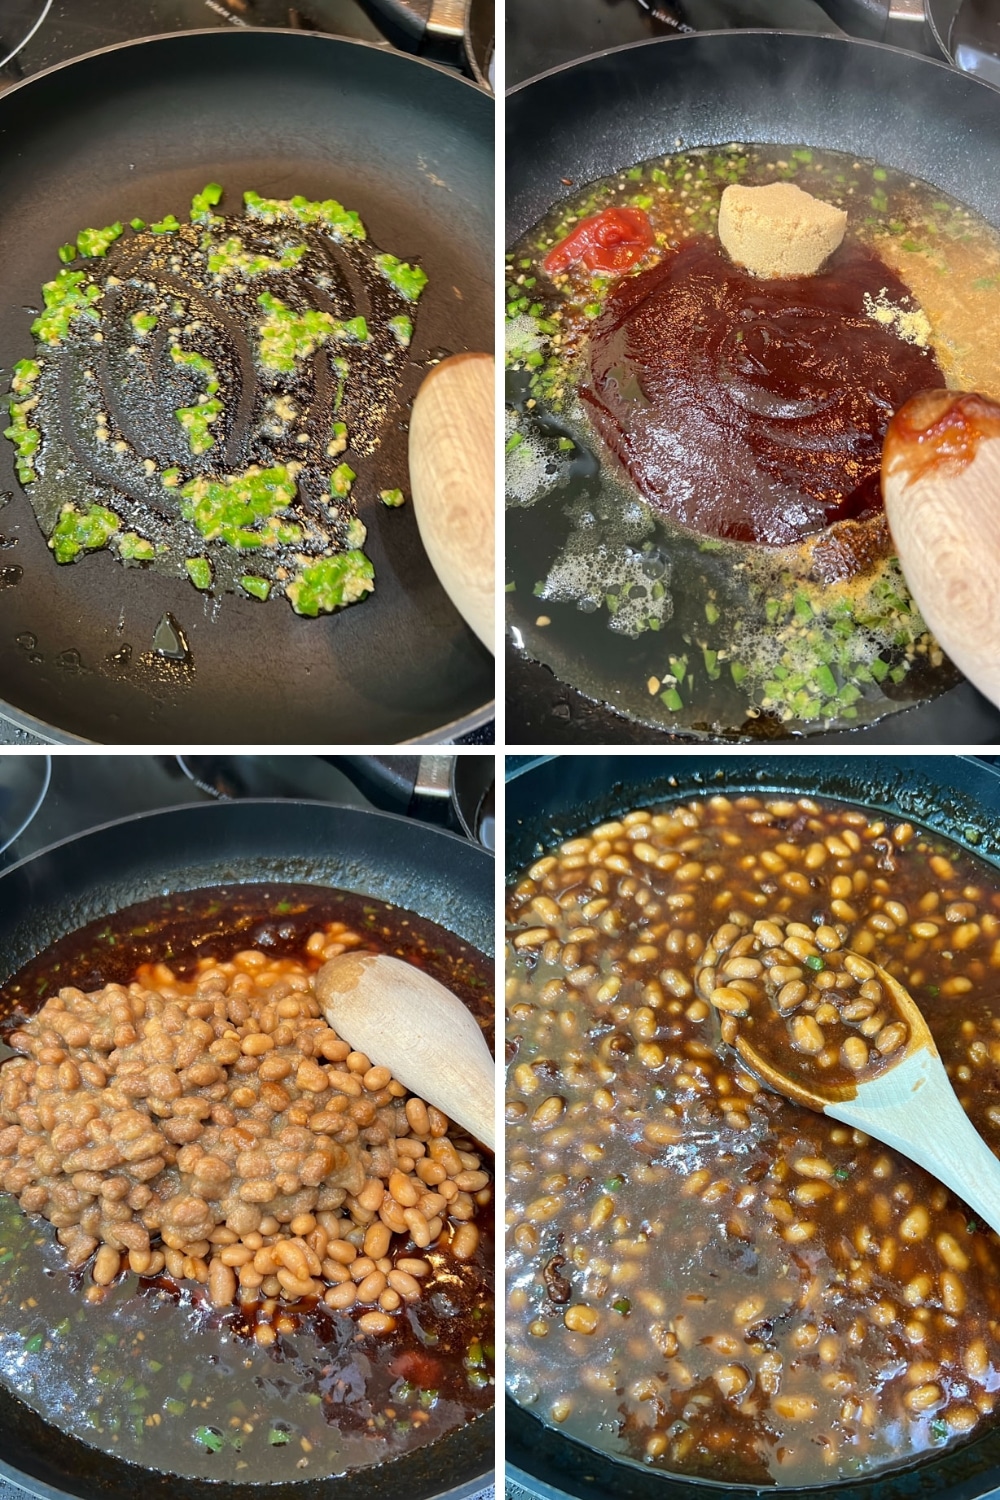 4 photos showing how to make baked beans